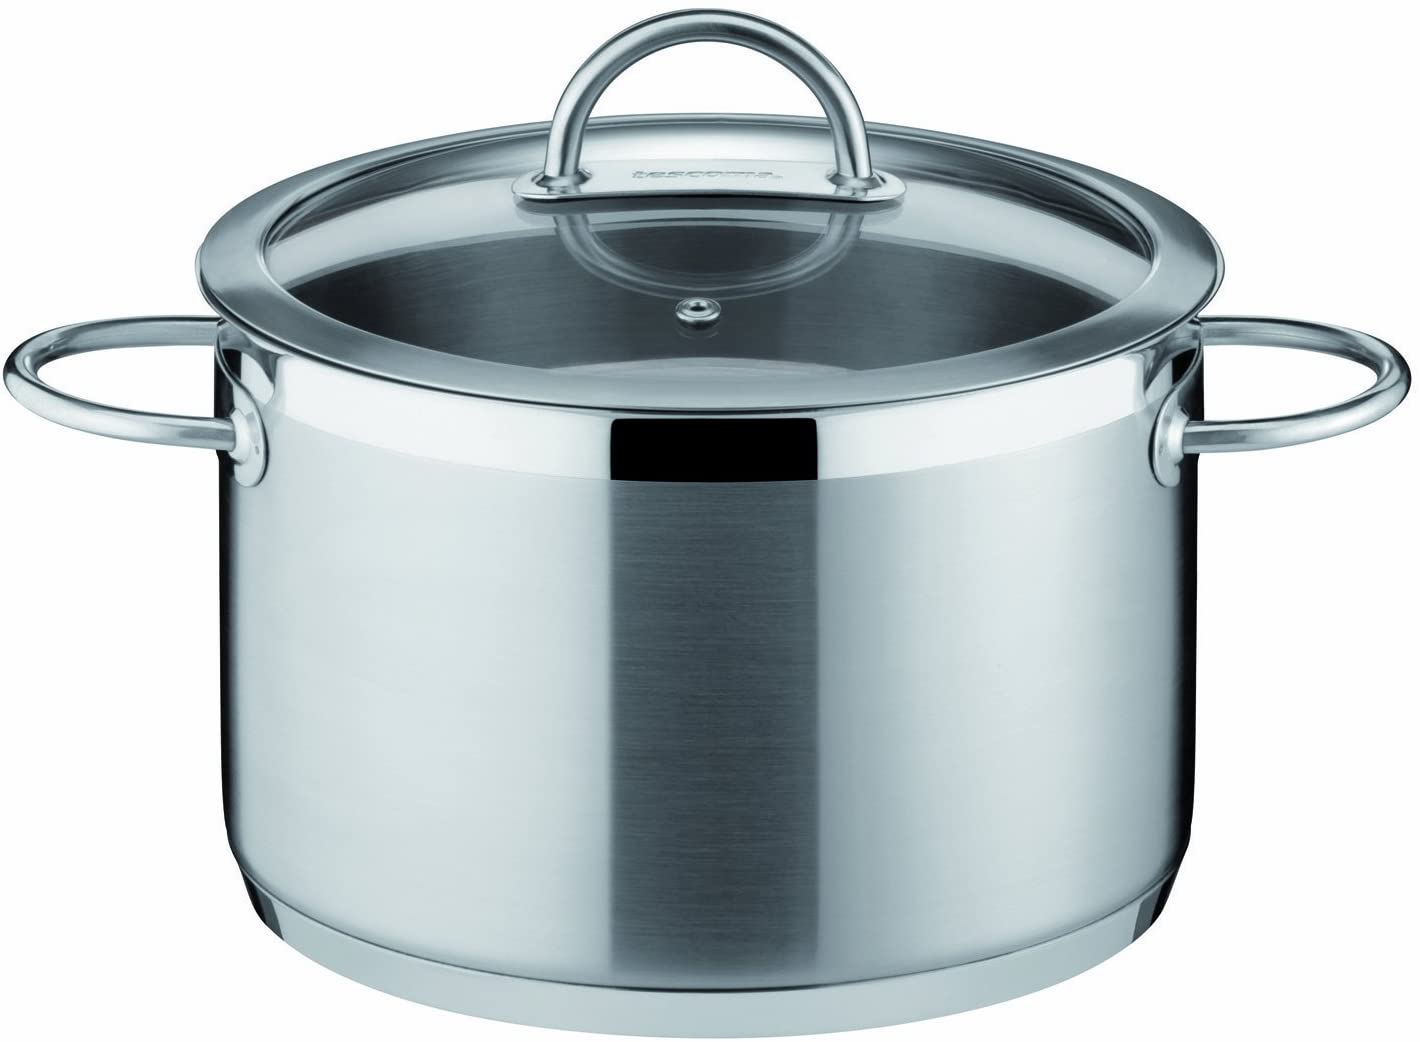 Tescoma Vision 14 cm/ 1.5 Litre Deep Pot with Cover